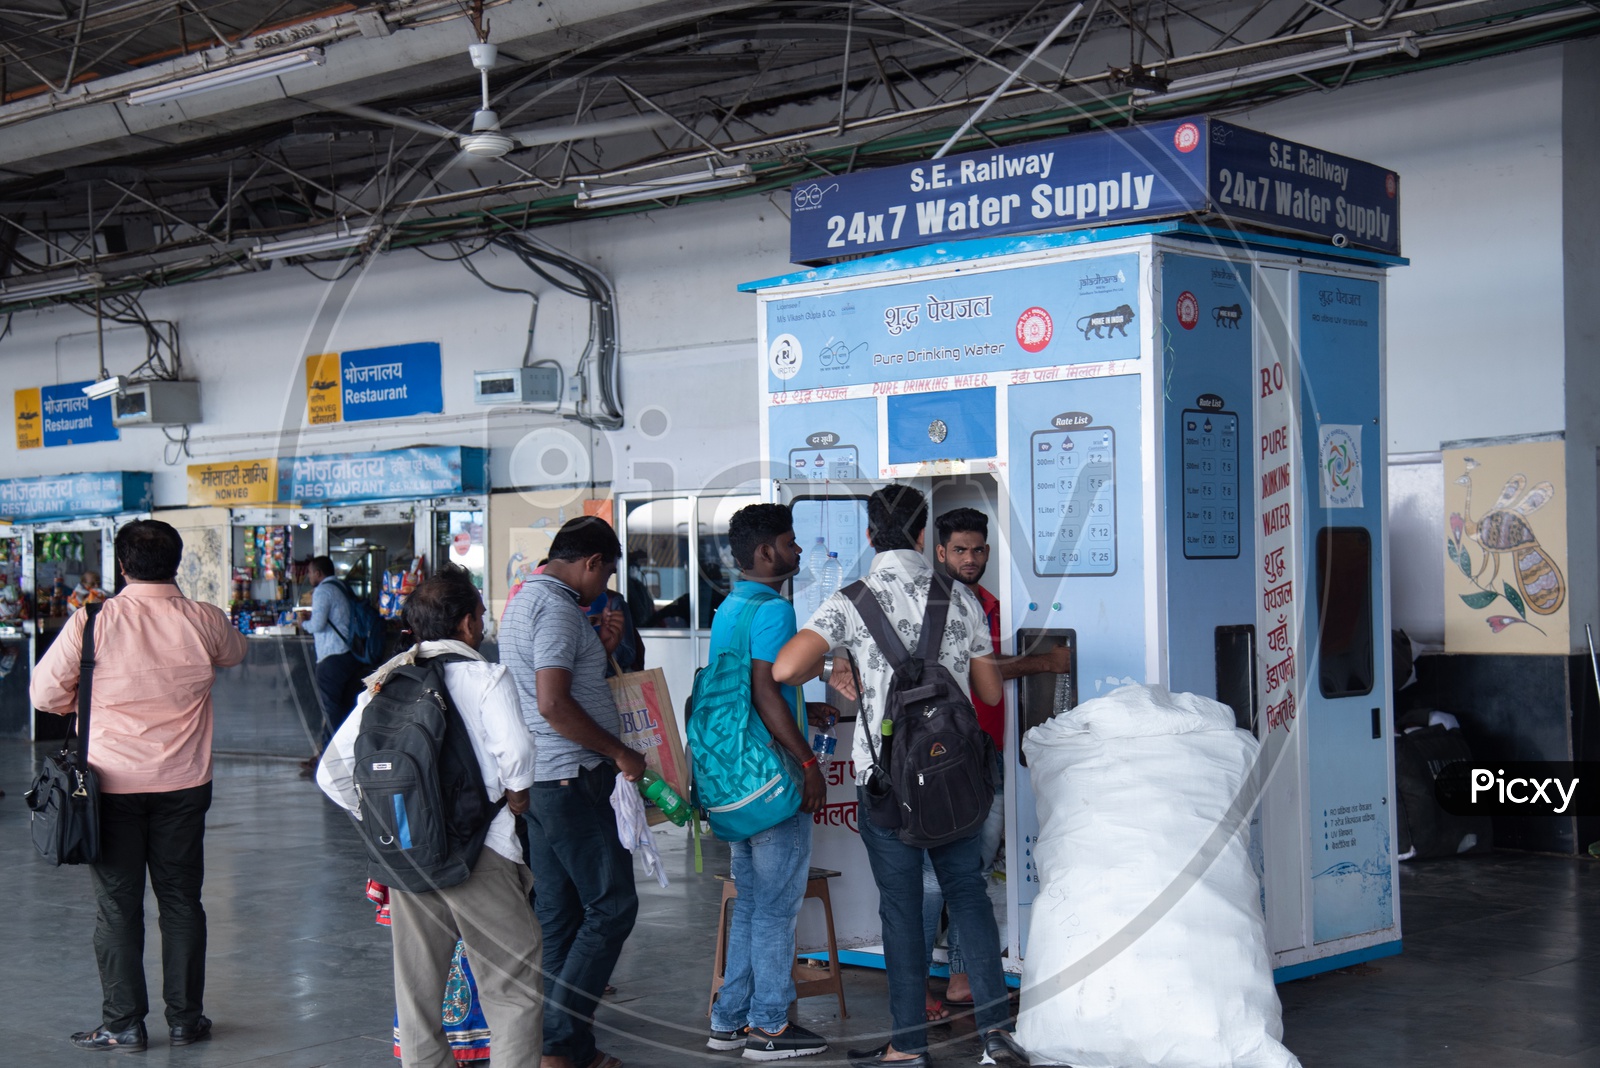 Passengers Filling  Water Bottles At The  Water Supply Points Or Machines By The Indian Railways In a  Railway Station Platform